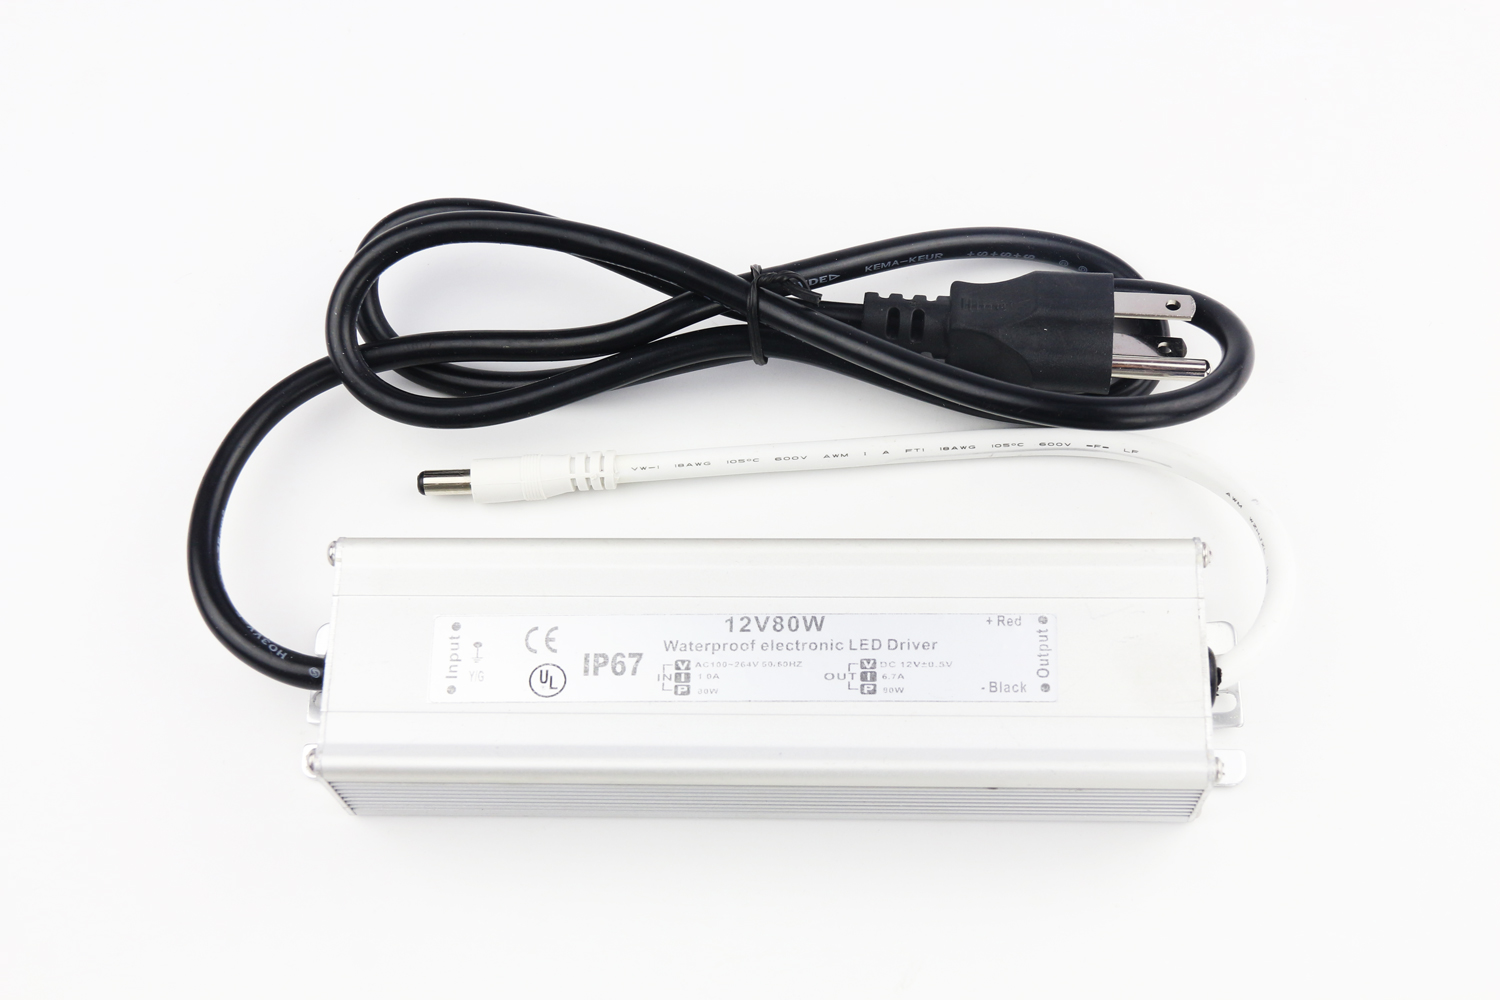 waterproof adapter 12V80W 1 - LED Power Supply